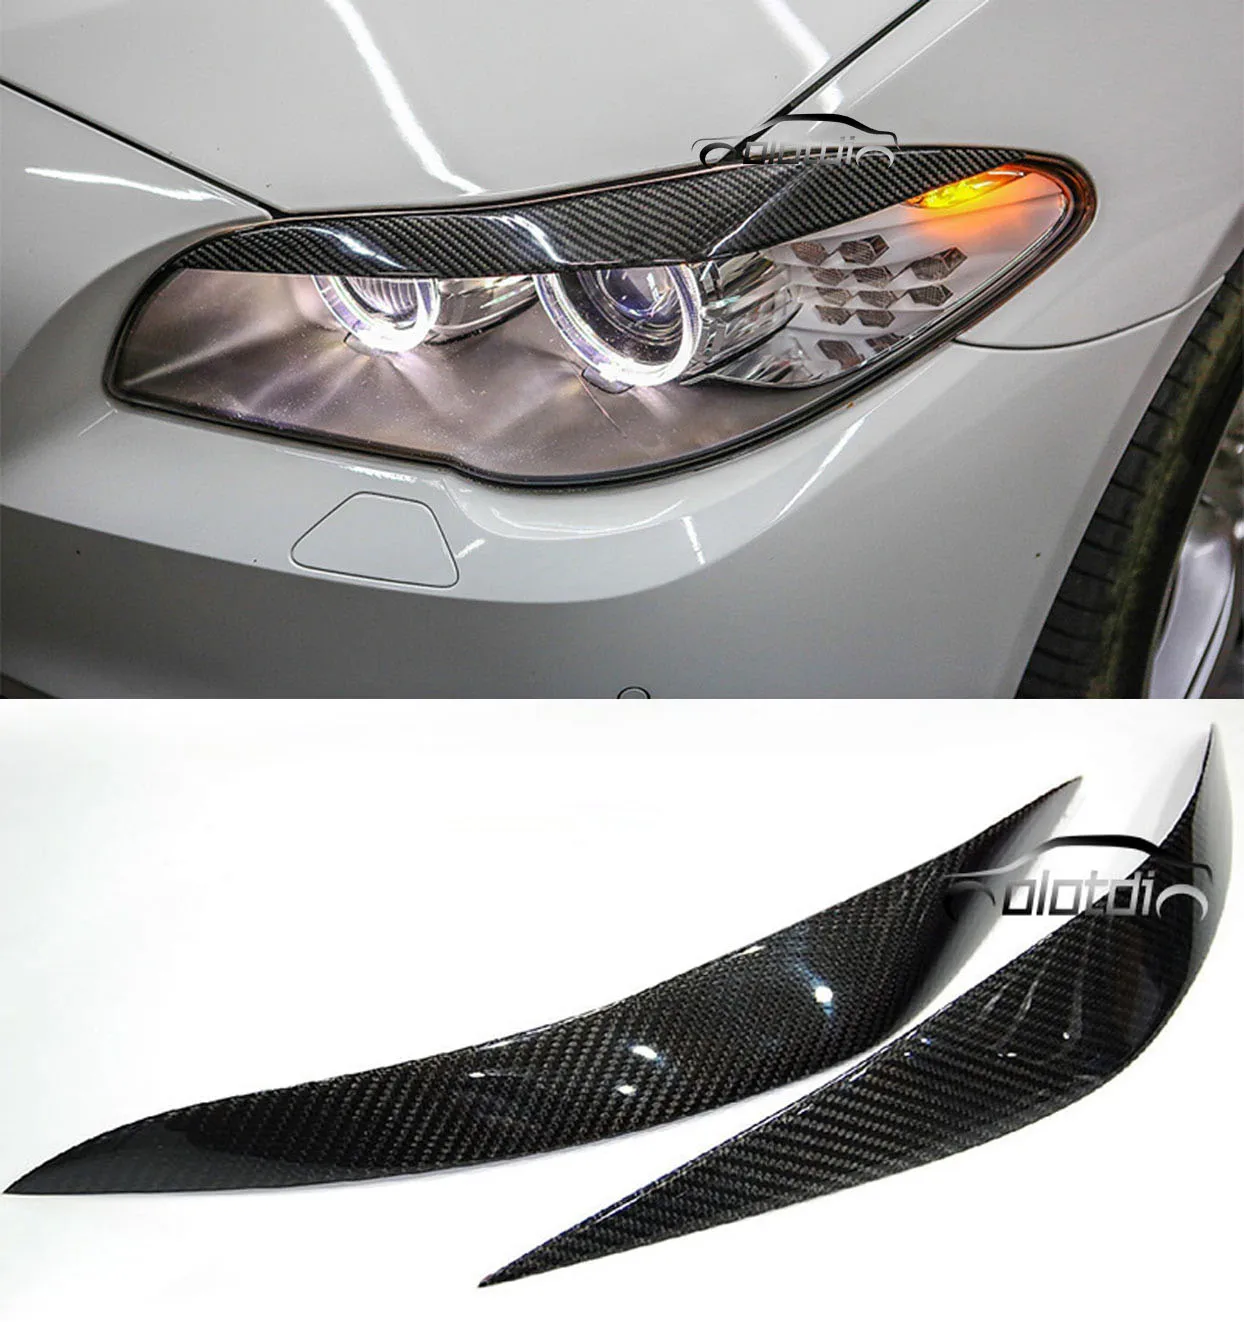 Color : Carbon Fiber 1Pair Car Headlight Eyebrows Cover Fit For BMW 5 Series F10 2010-2013 Trim Decal Decor Headlight Eyebrows Carbon Fiber Sticker FeiNianJSh SY-CDMMS